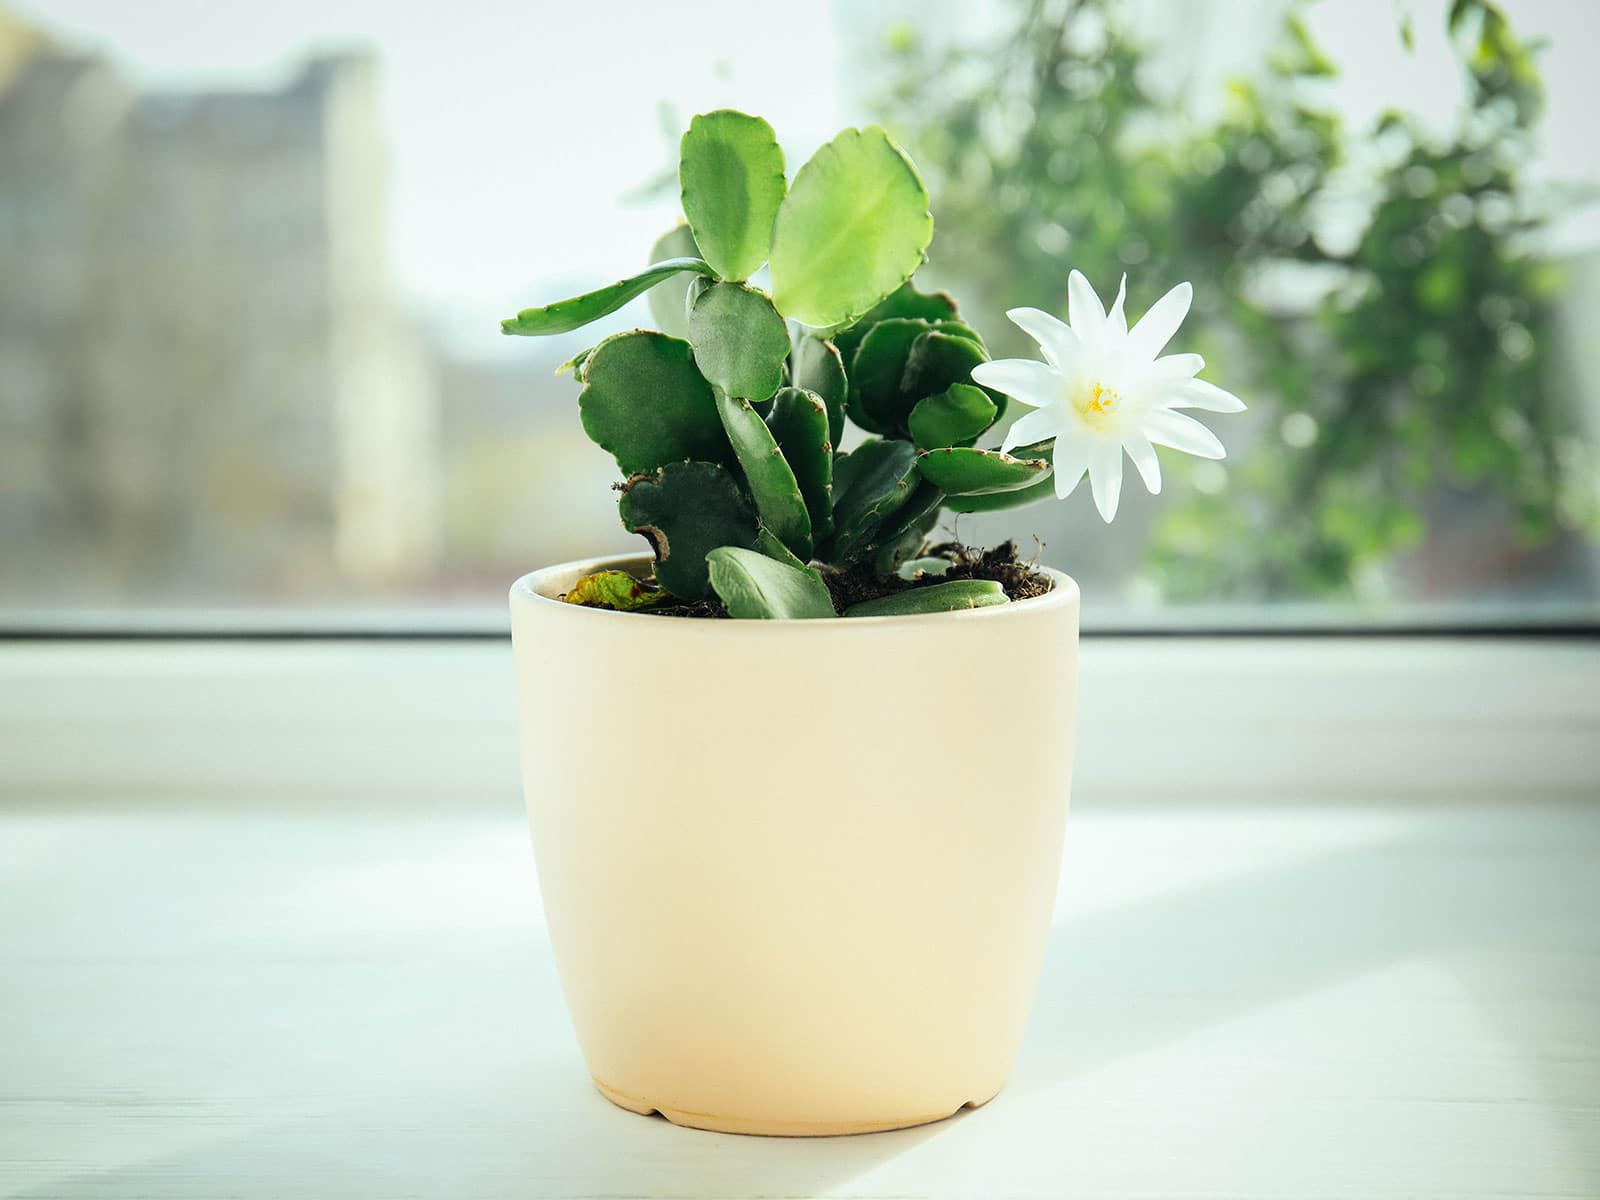 A small potted holiday cactus plant with a white flower, sitting on a windowsill